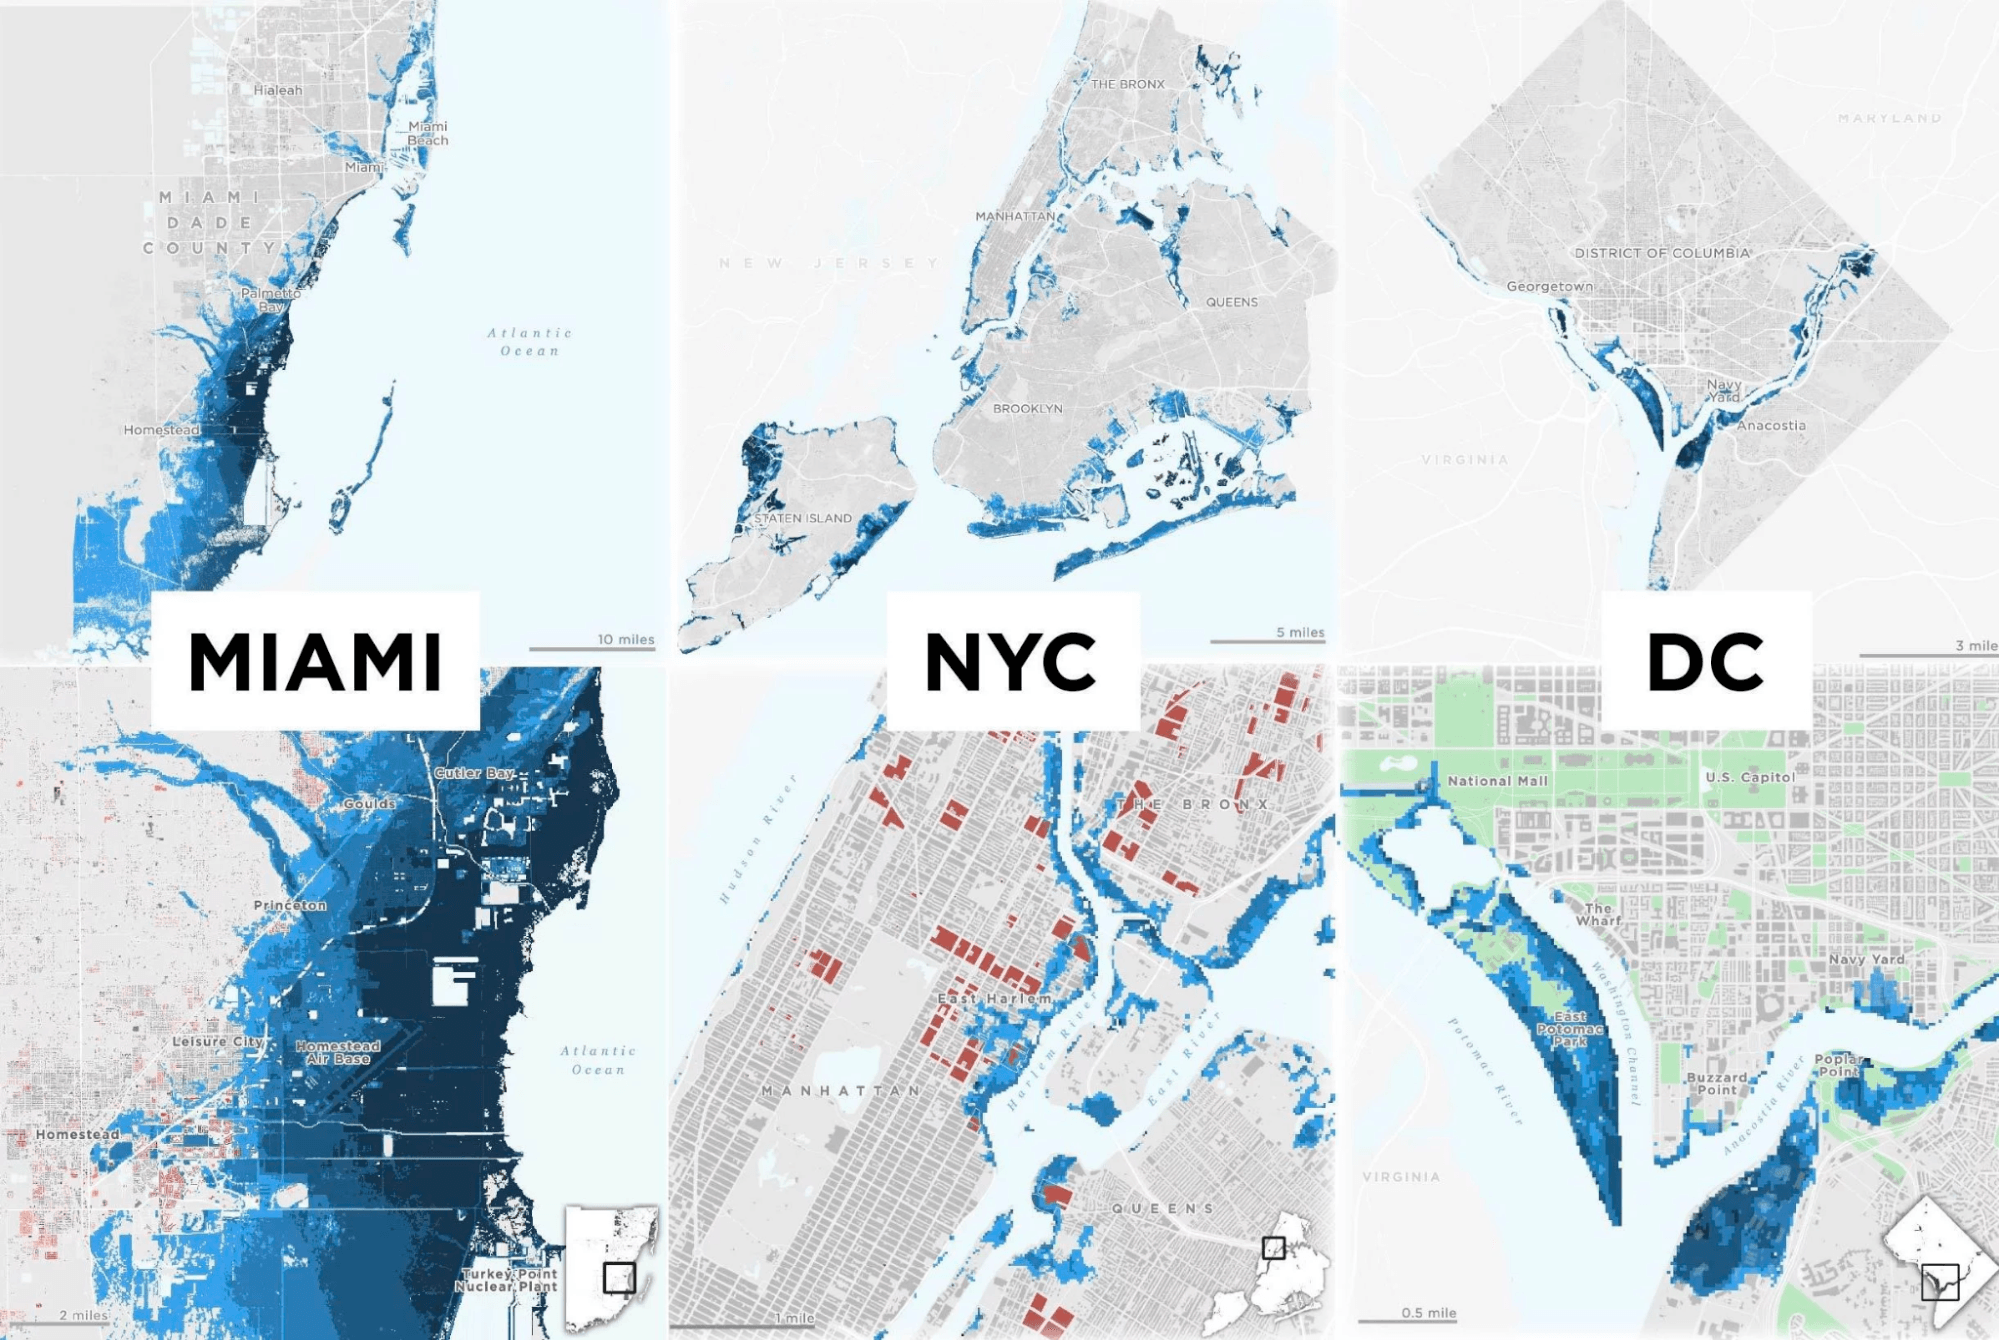 The future impact of hurricane flooding on US cities